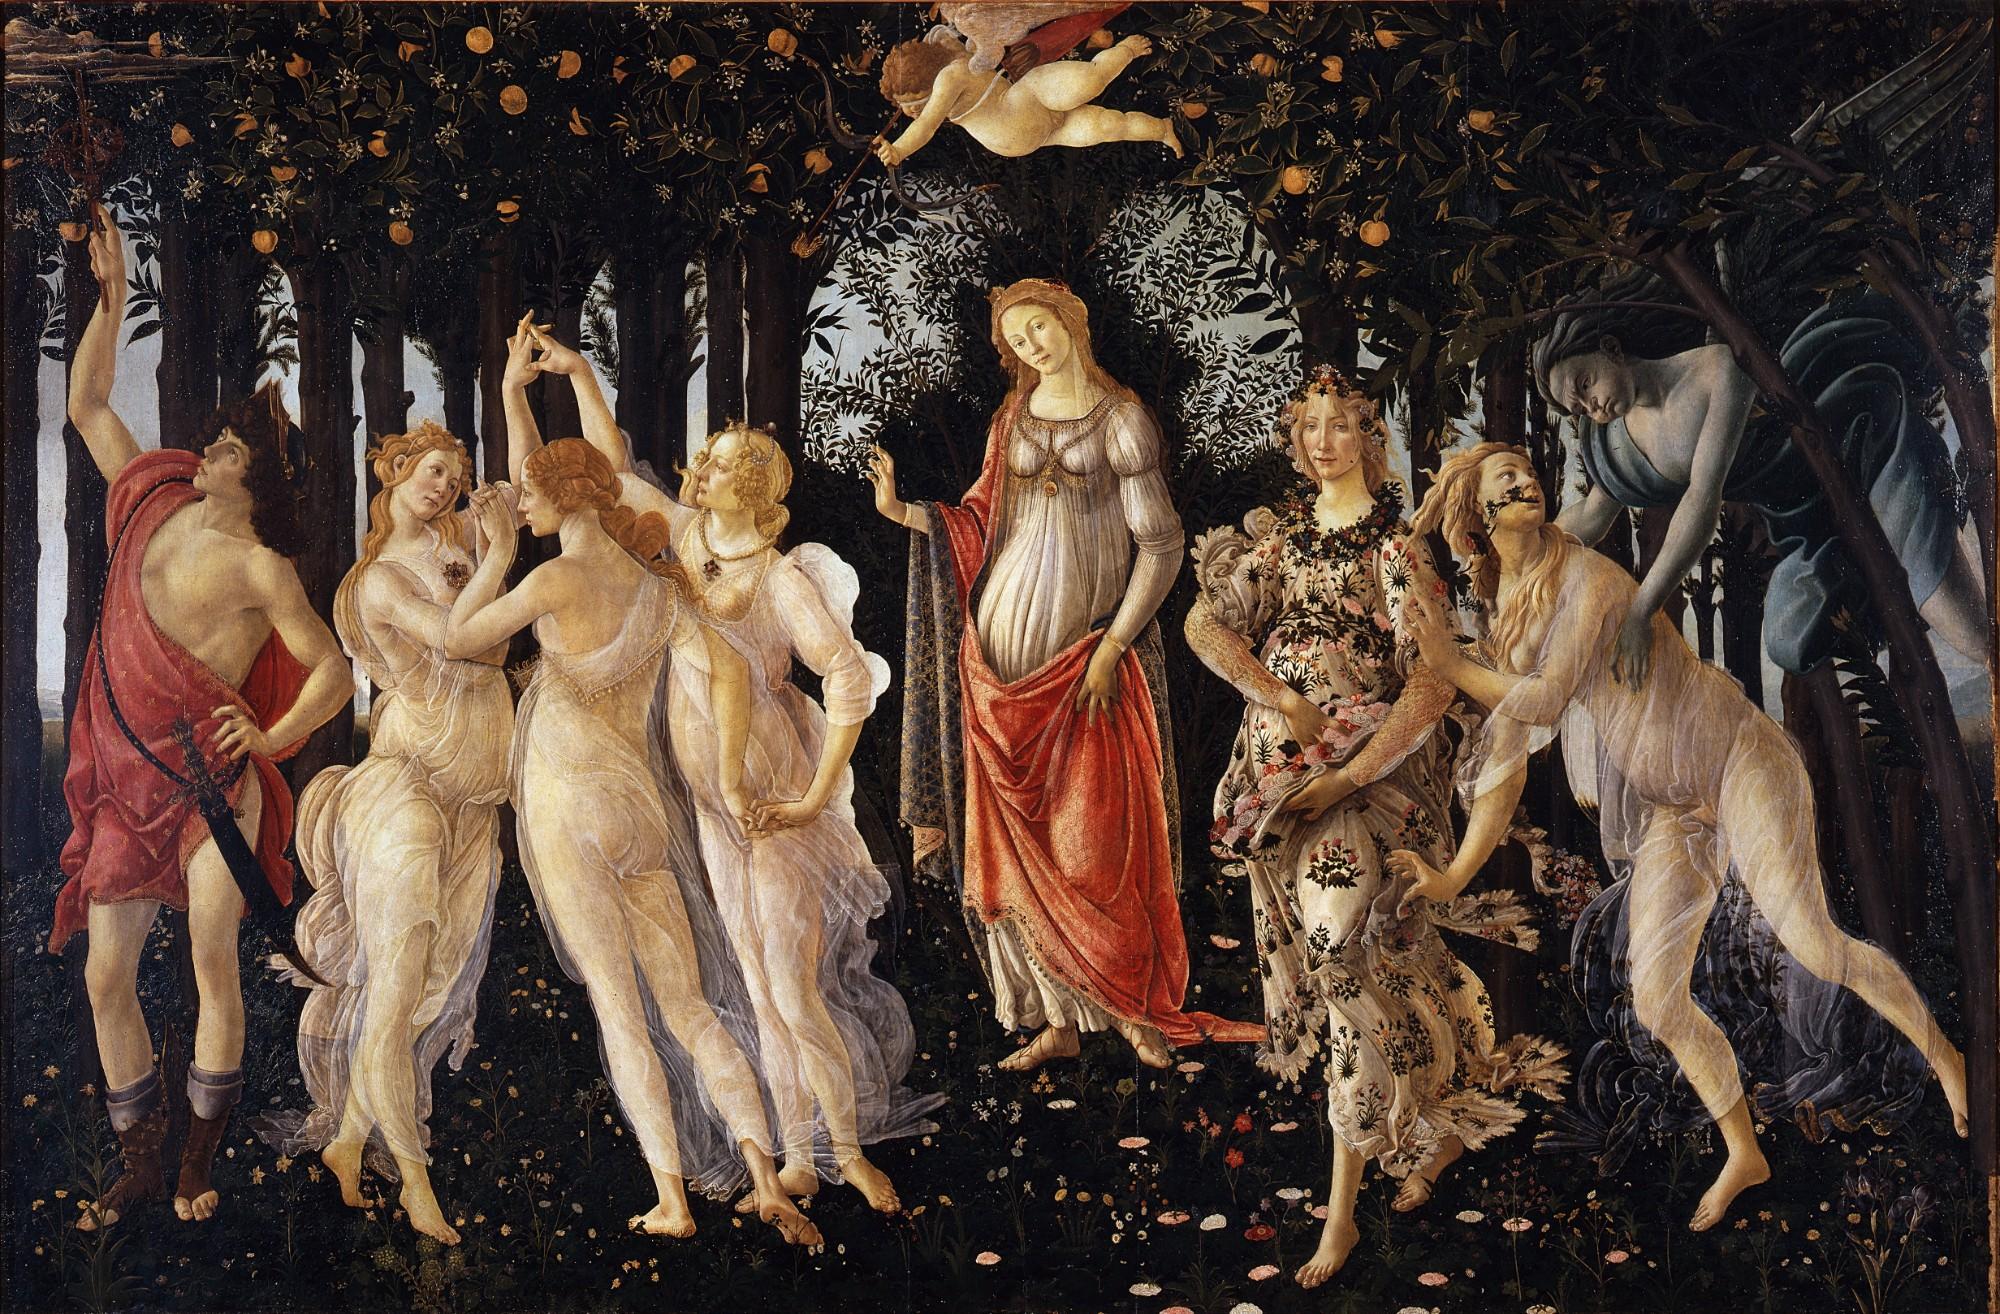 5 Facts to Take You Deeper into Botticelli’s “Allegory of Spring”